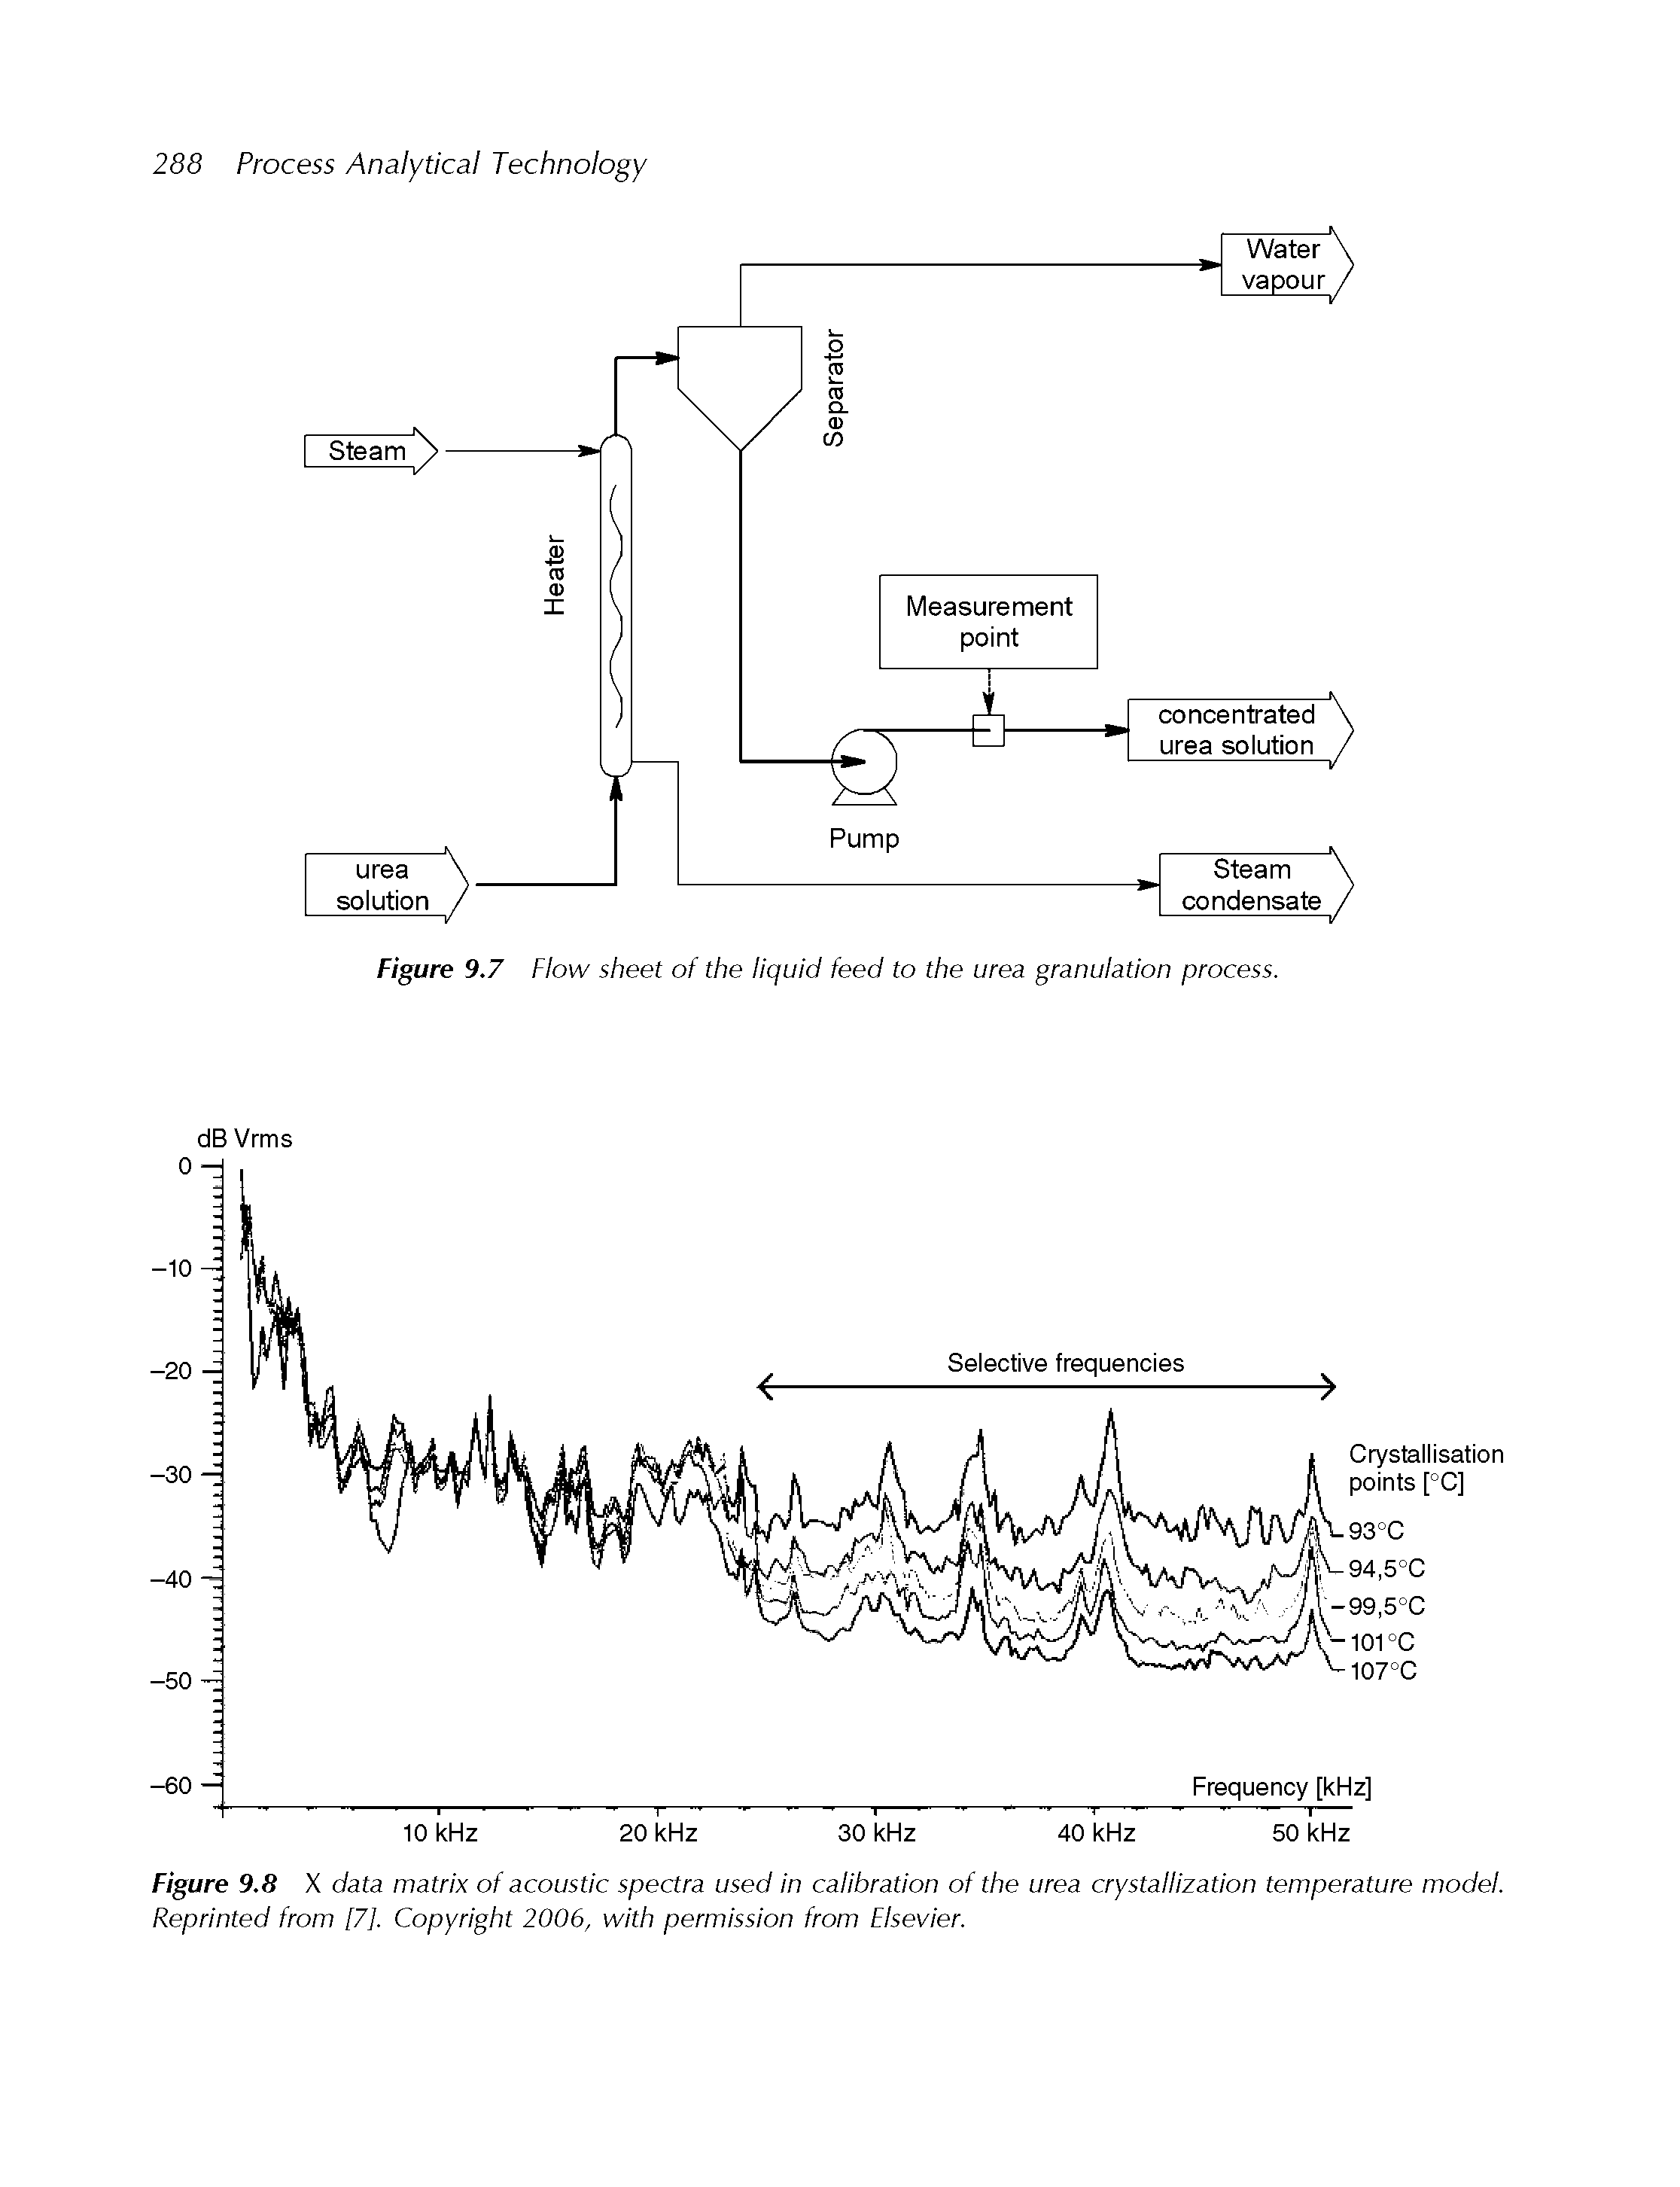 Figure 9.8 X data matrix of acoustic spectra used in calibration of the urea crystallization temperature model. Reprinted from [7], Copyright 2006, with permission from Elsevier.